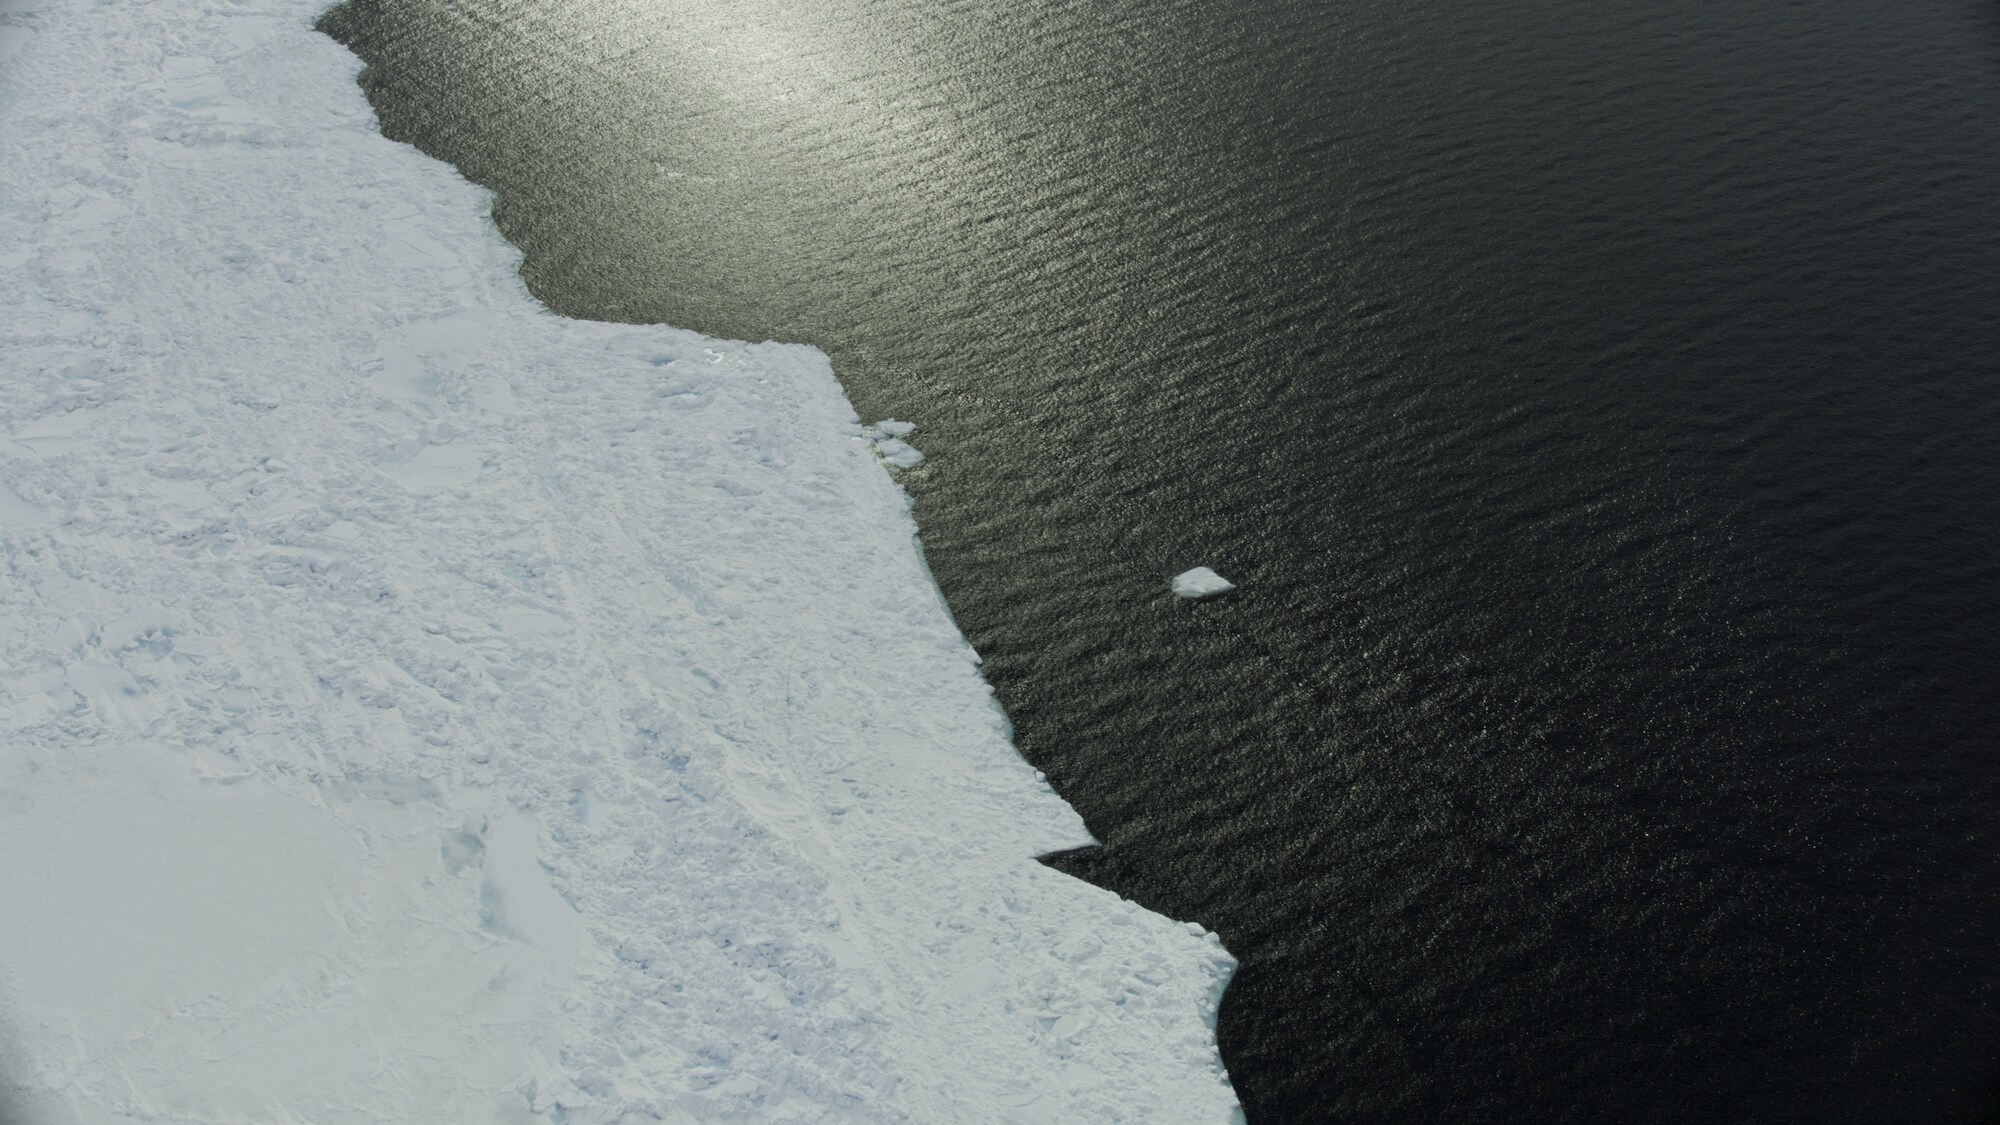 The floe edge, or "Sinaaq" in Inuktitut, is where open water meets the ice still attached to the shoreline. (National Geographic for Disney+/Thomas Miller)